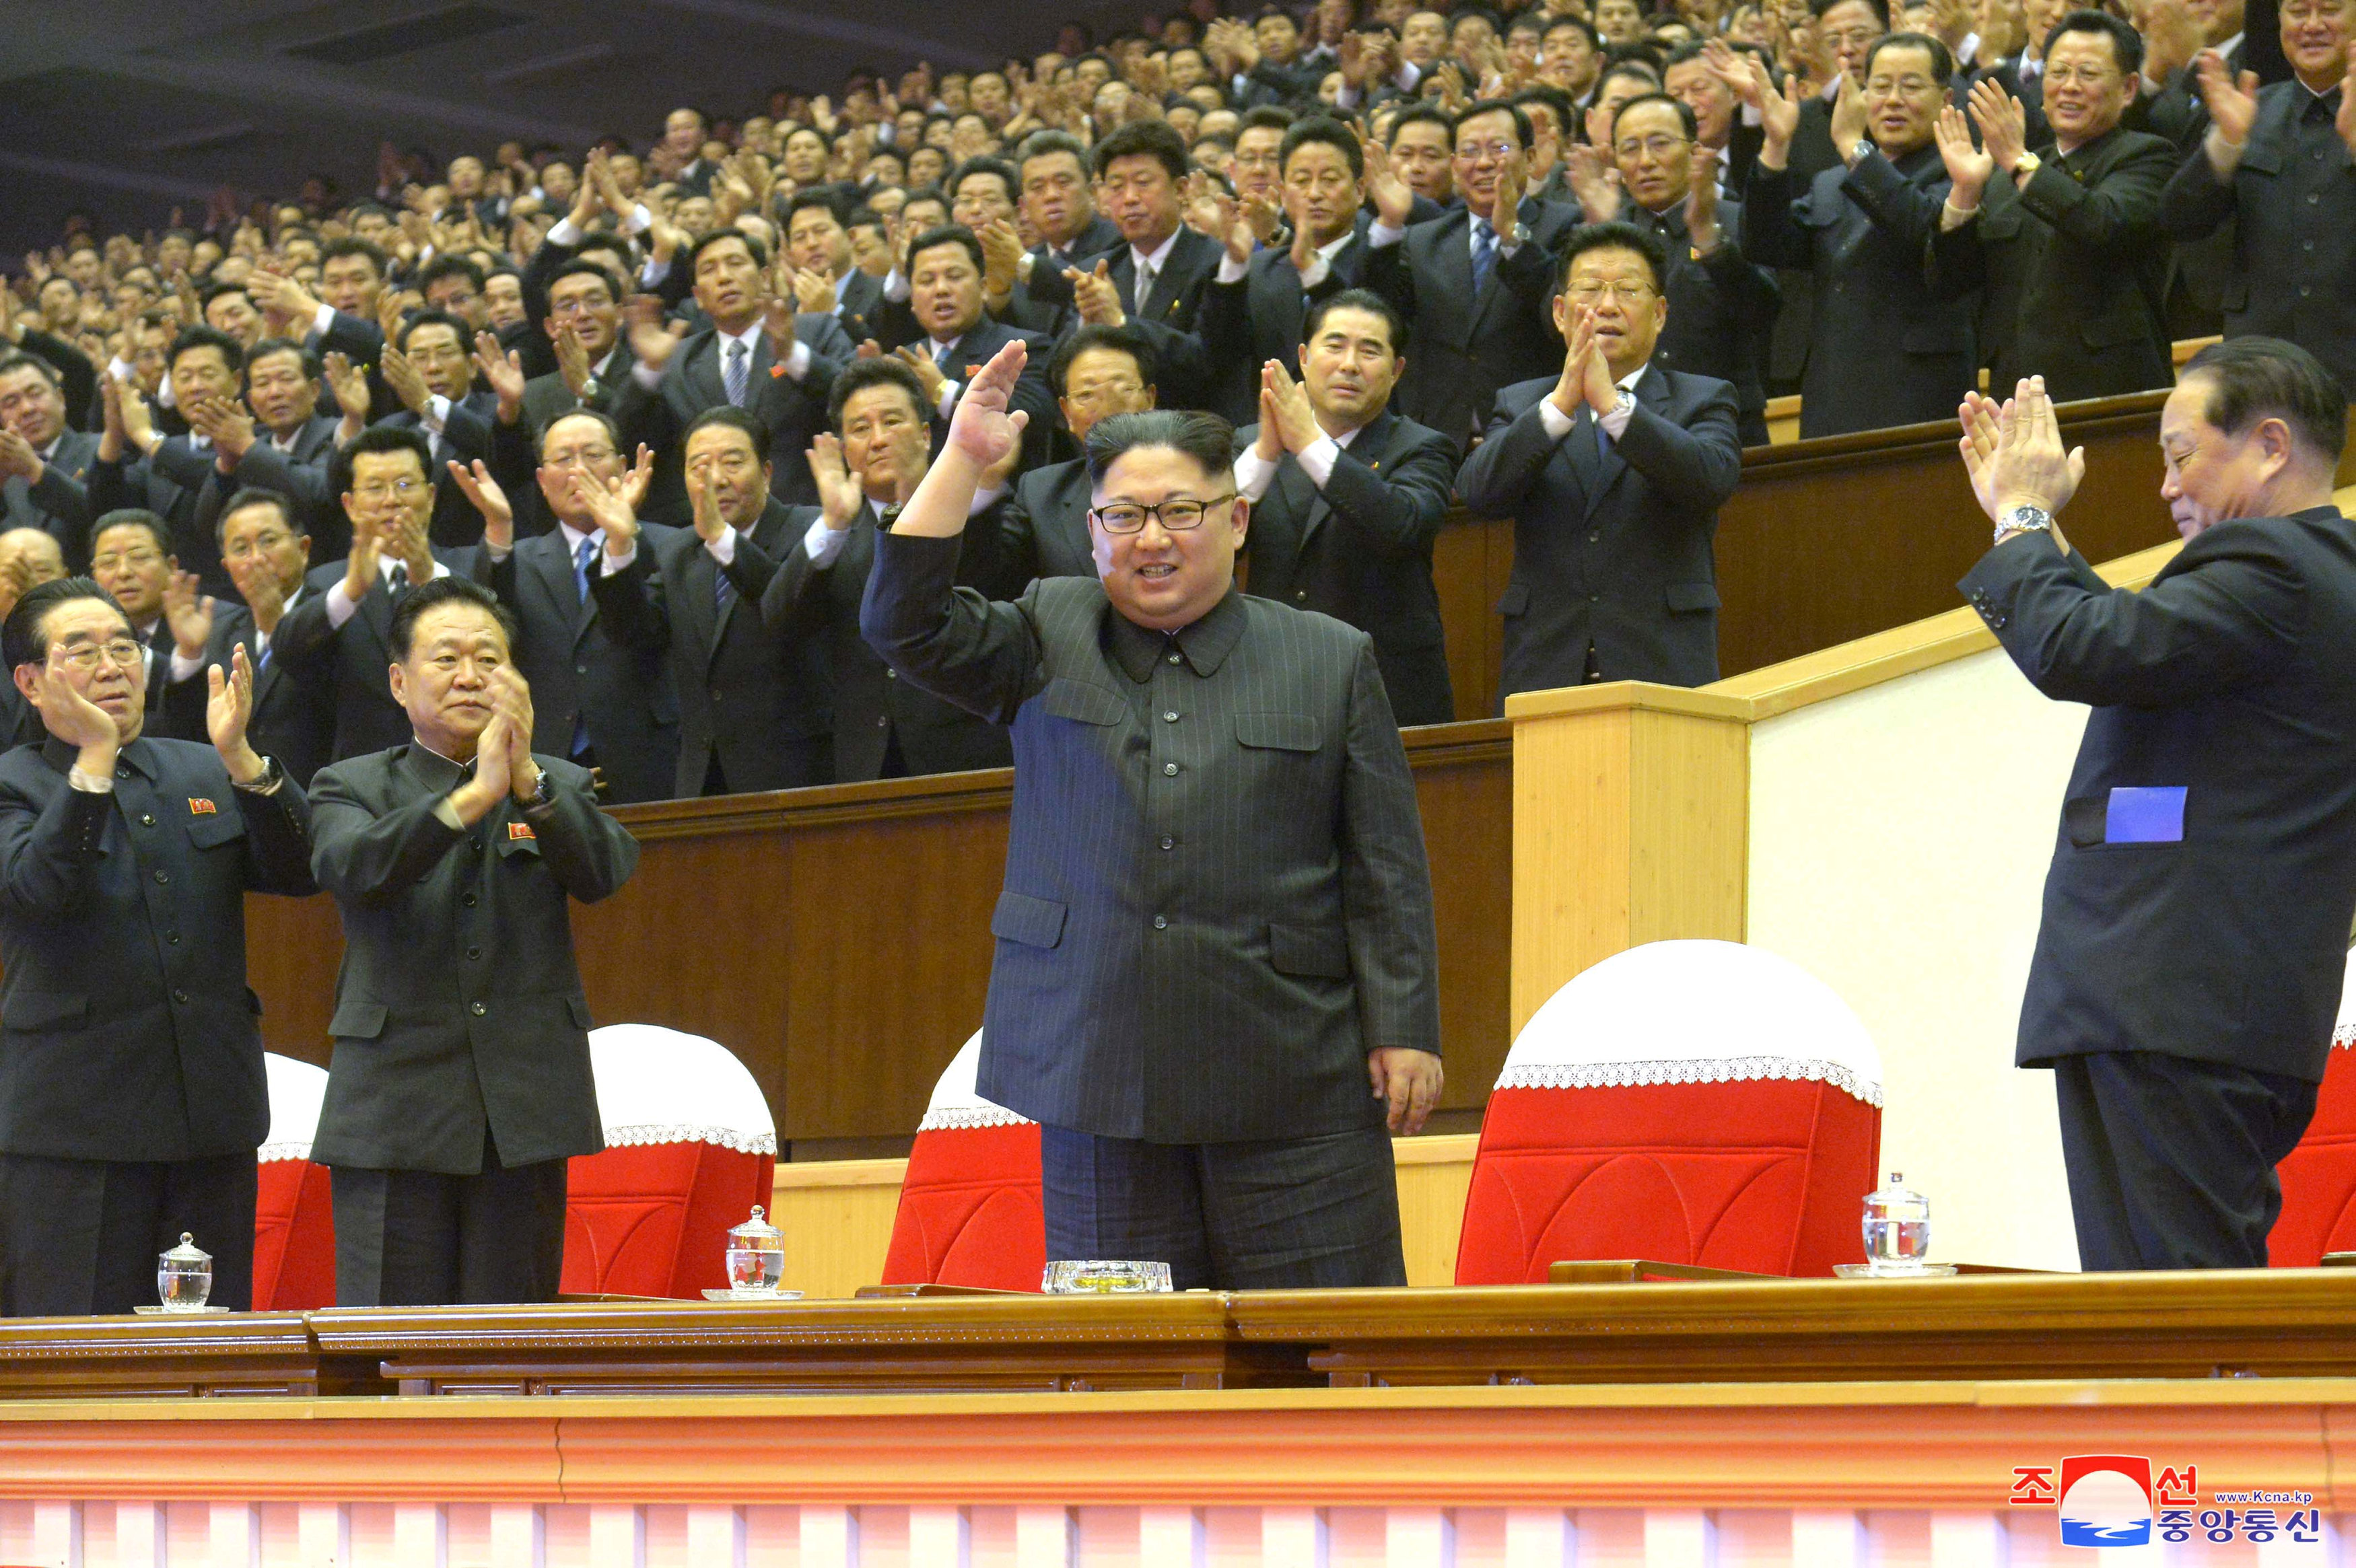 North Korean Kim Jong Un attends a music concert for the Attendants of the 5th Conference of Cell Chairpersons of the Workersu00e2u20acu2122 Party of Korea (WPK) held in Pyongyang in this photo released by North Koreau00e2u20acu2122s Korean Central News Agency December 30, 2017.